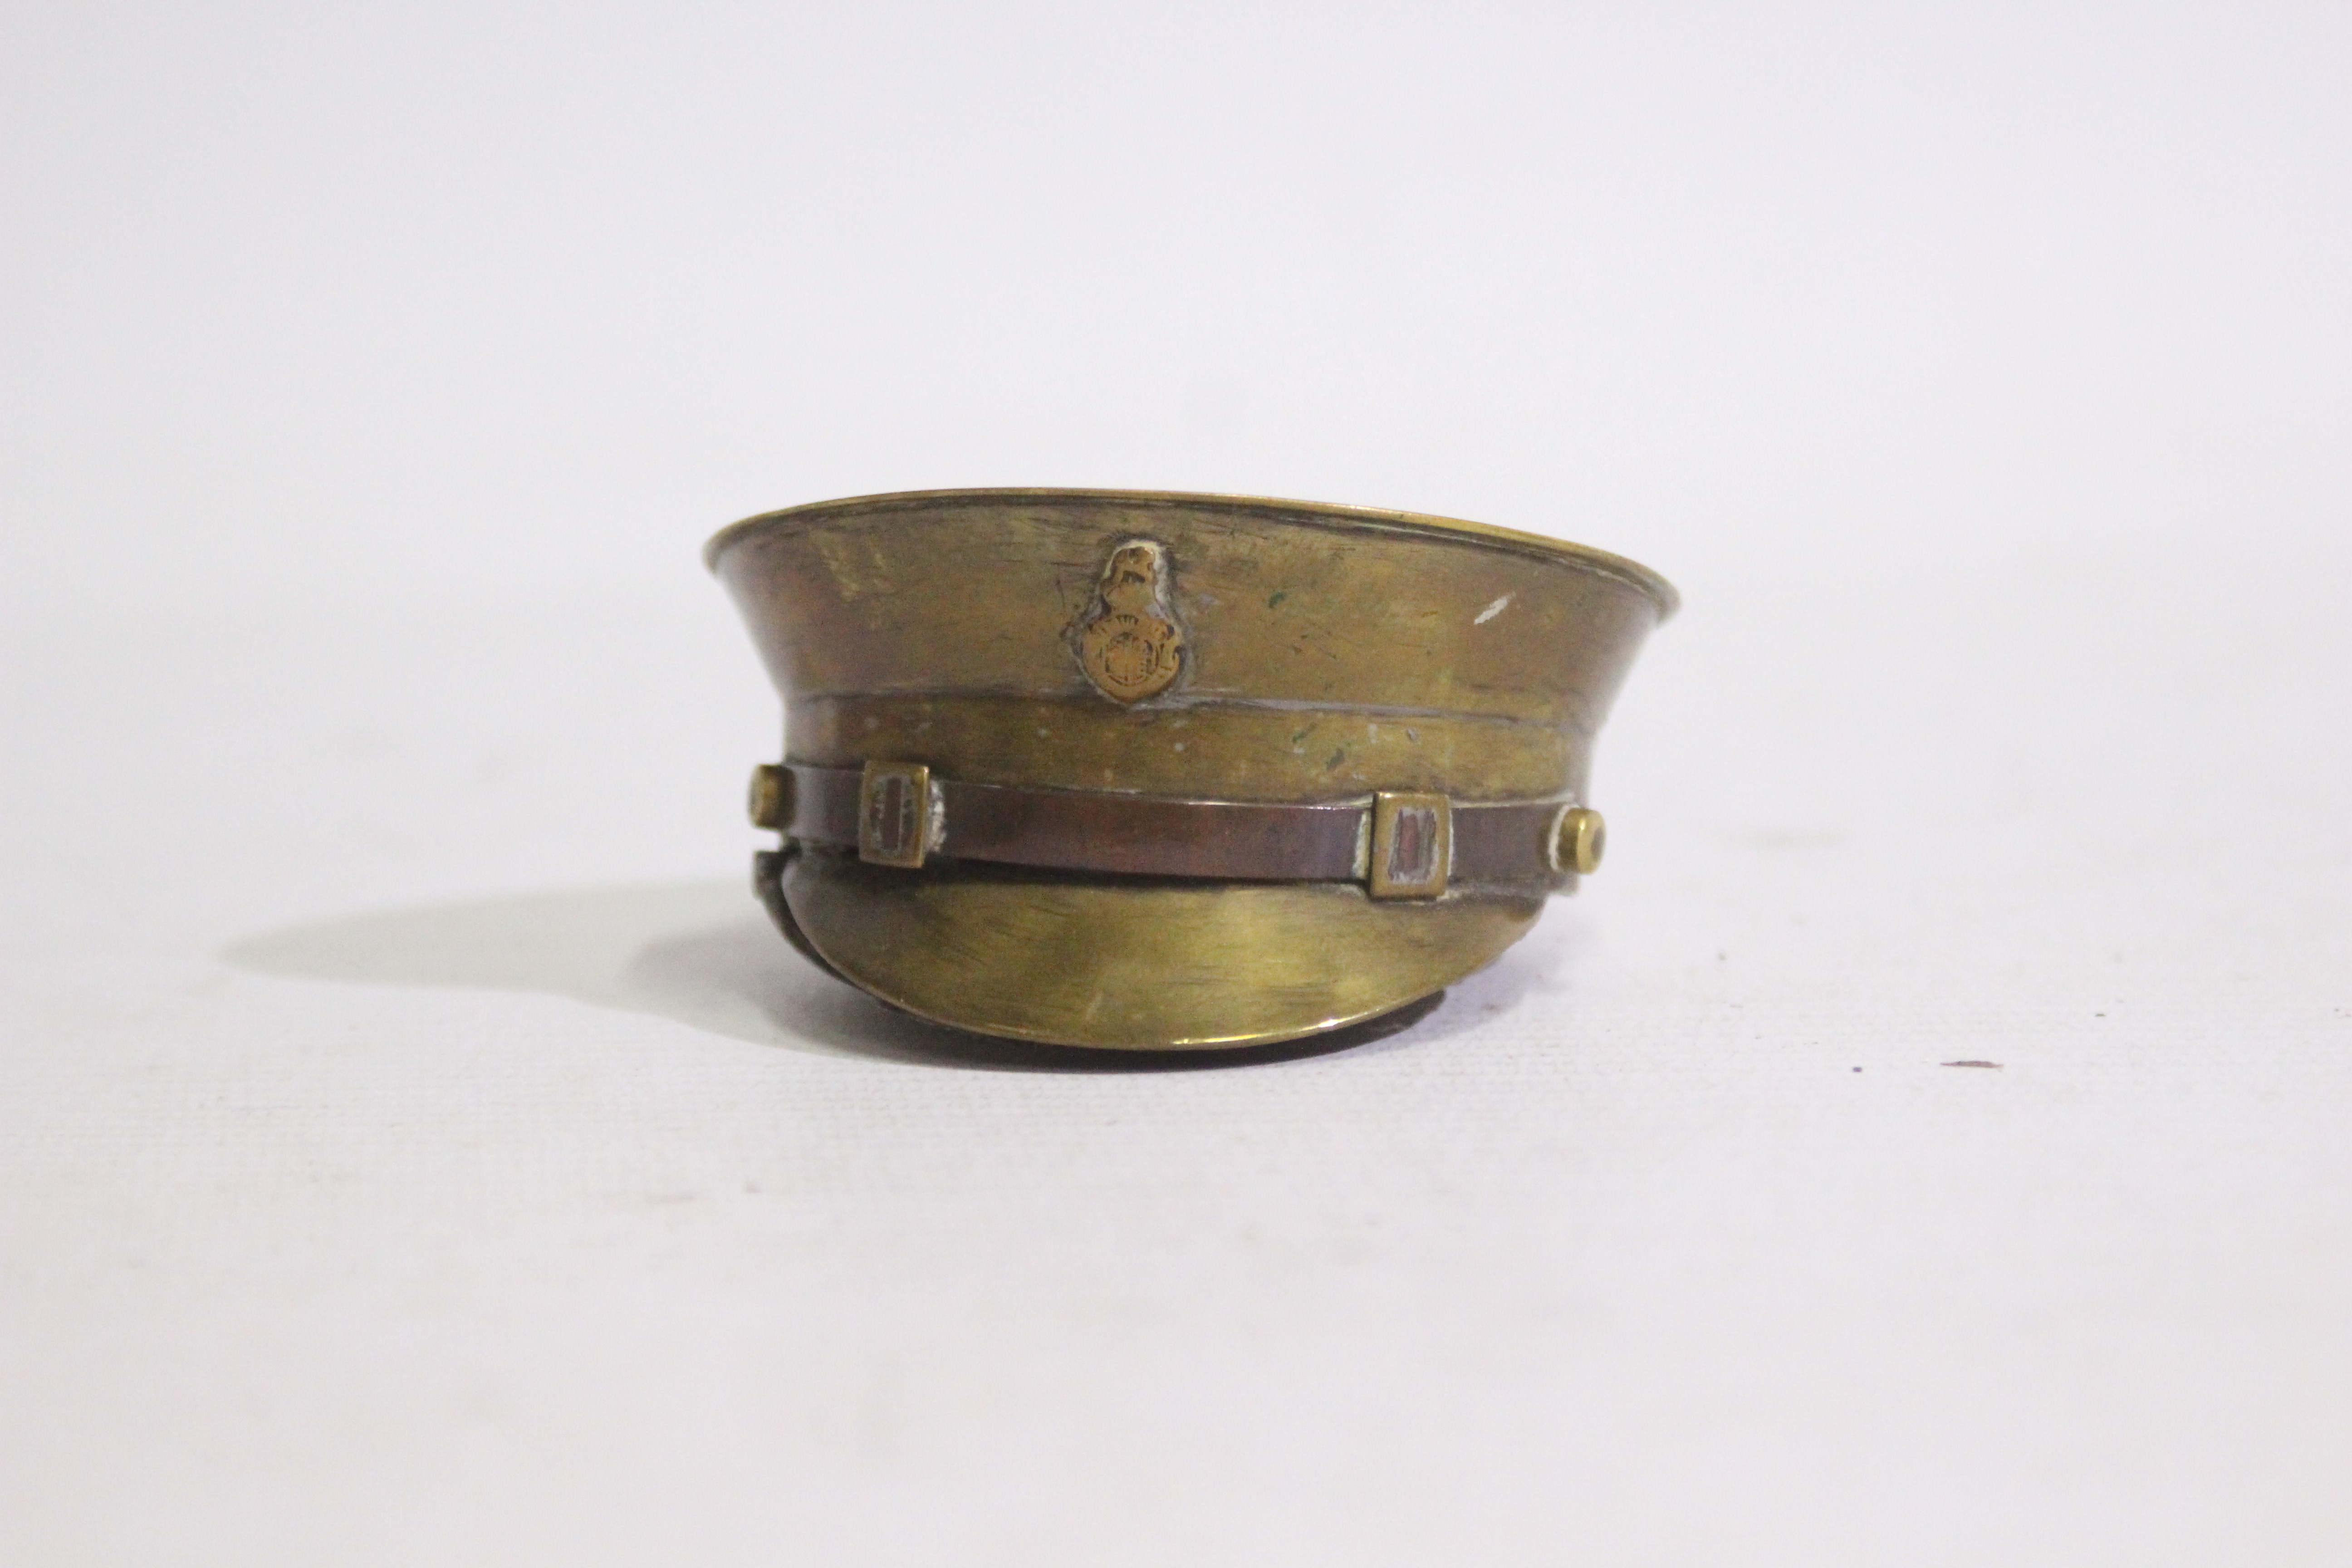 Military Hat Snuff Box - A brass officer